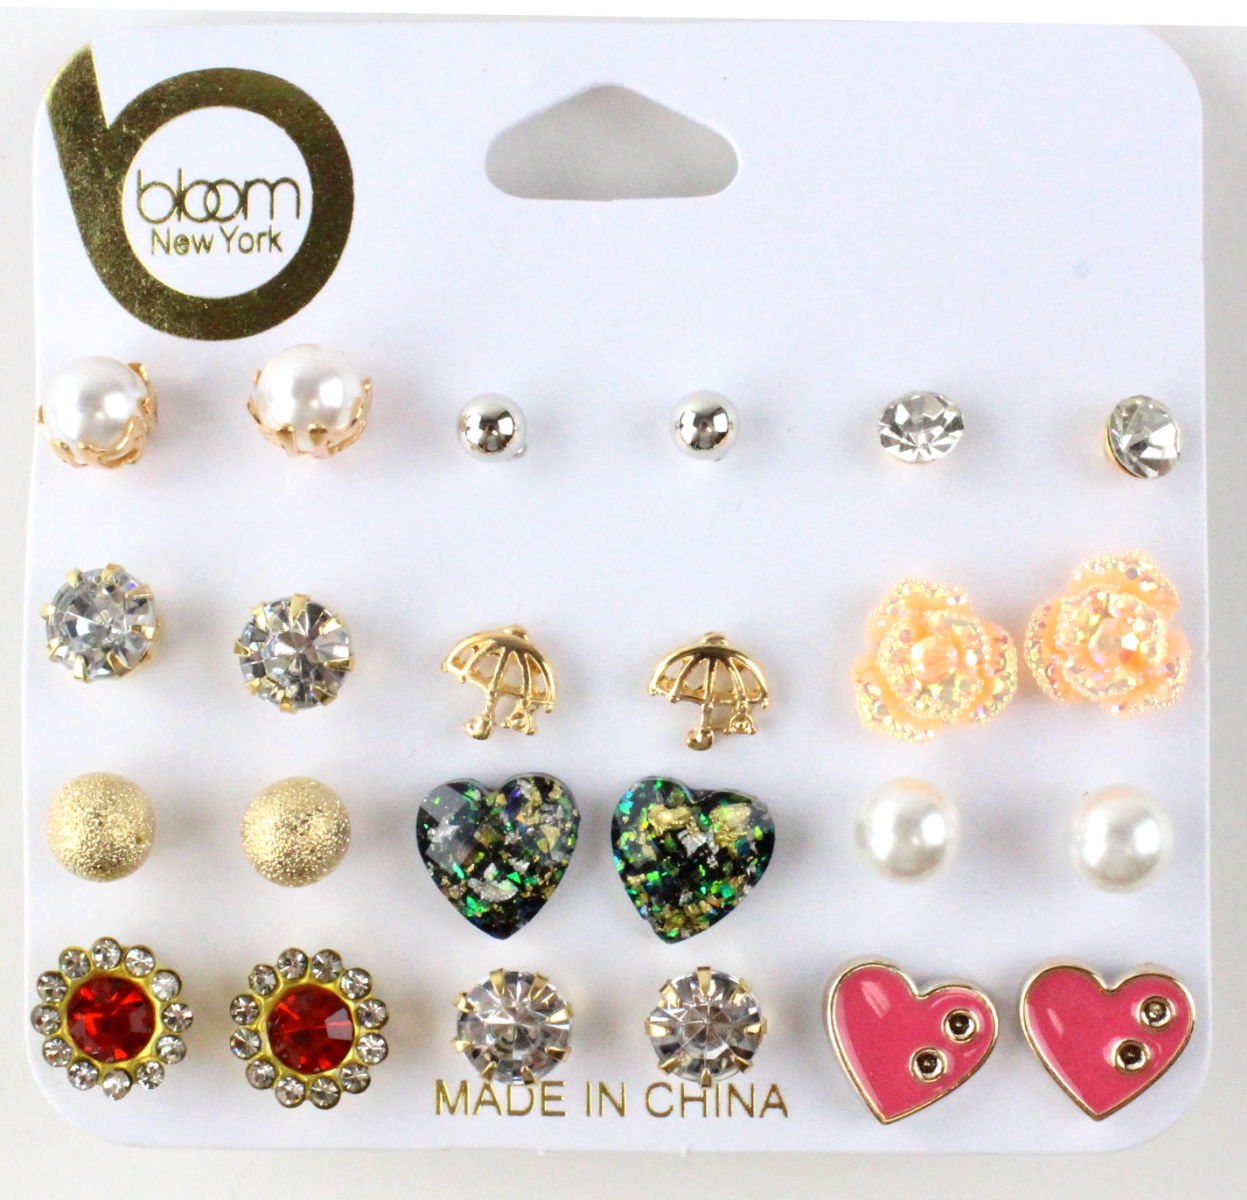 Accessories in cute, pretty, and slightly quirky jewels using our "JCJ" 12-Pack Assorted Earrings.